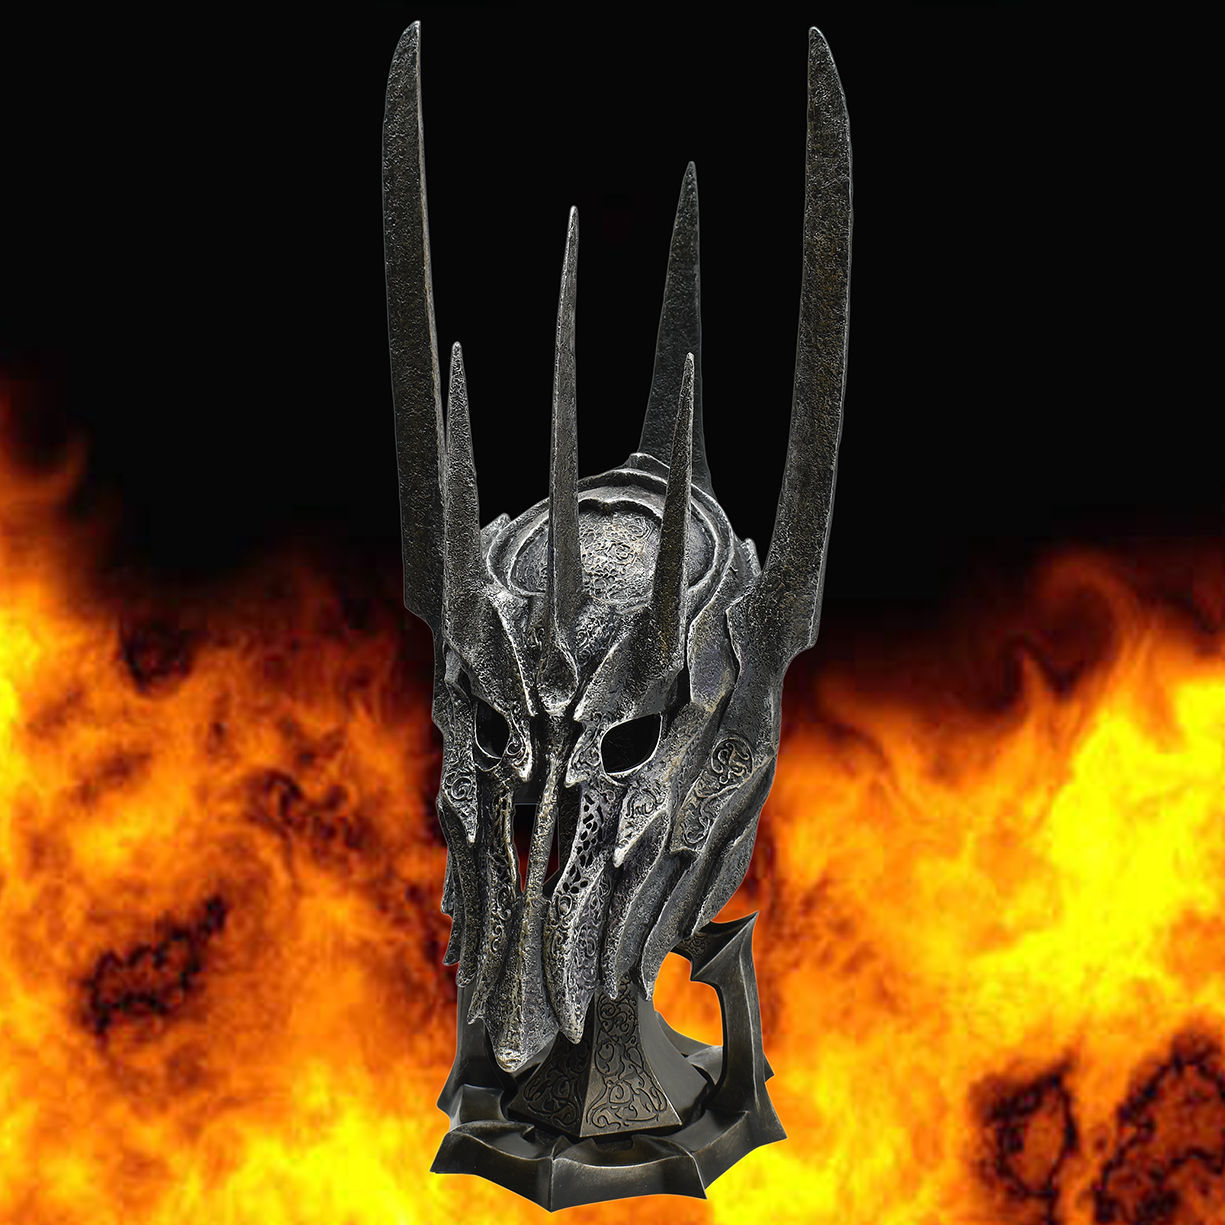 LOTR Sauron Helmet Half Scale Replica is 15 1/2” tall with etched surface sculpting matching the original movie prop